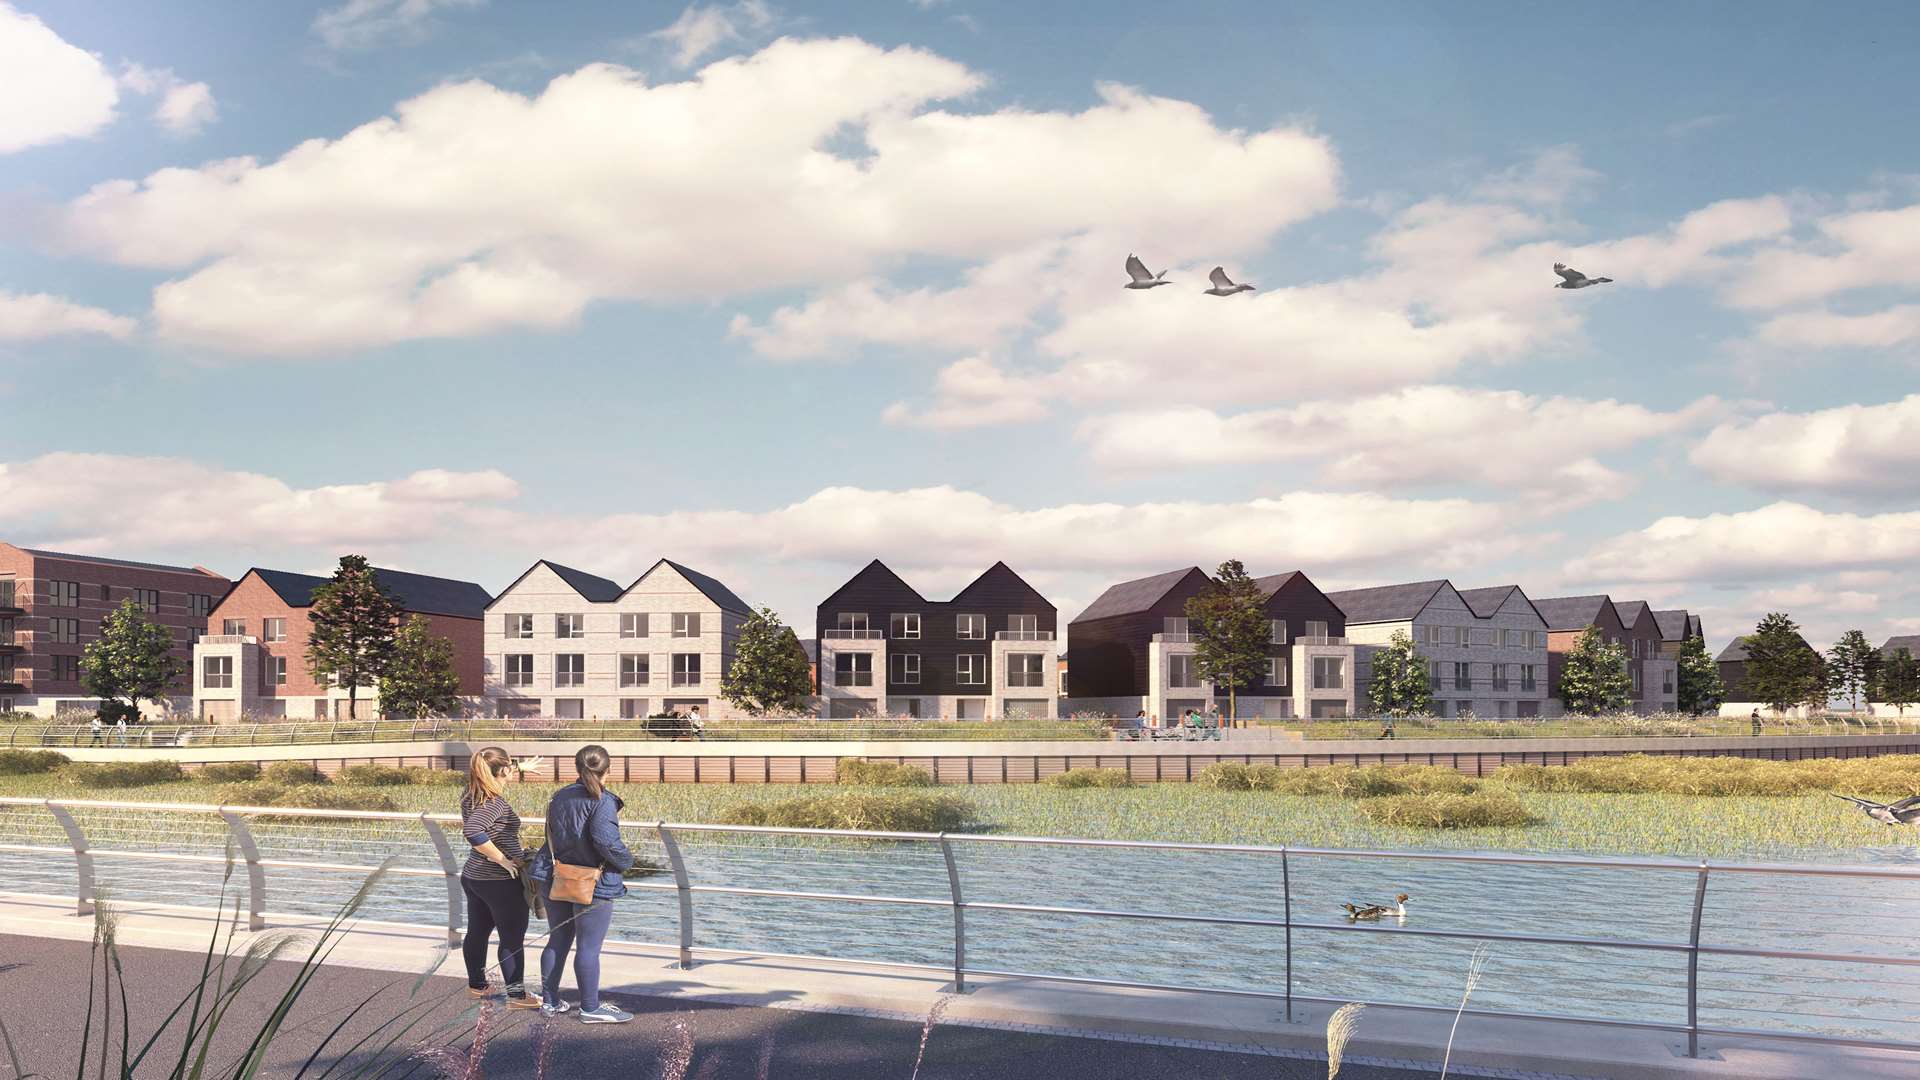 Development at Rochester Riverside will begin later this year.